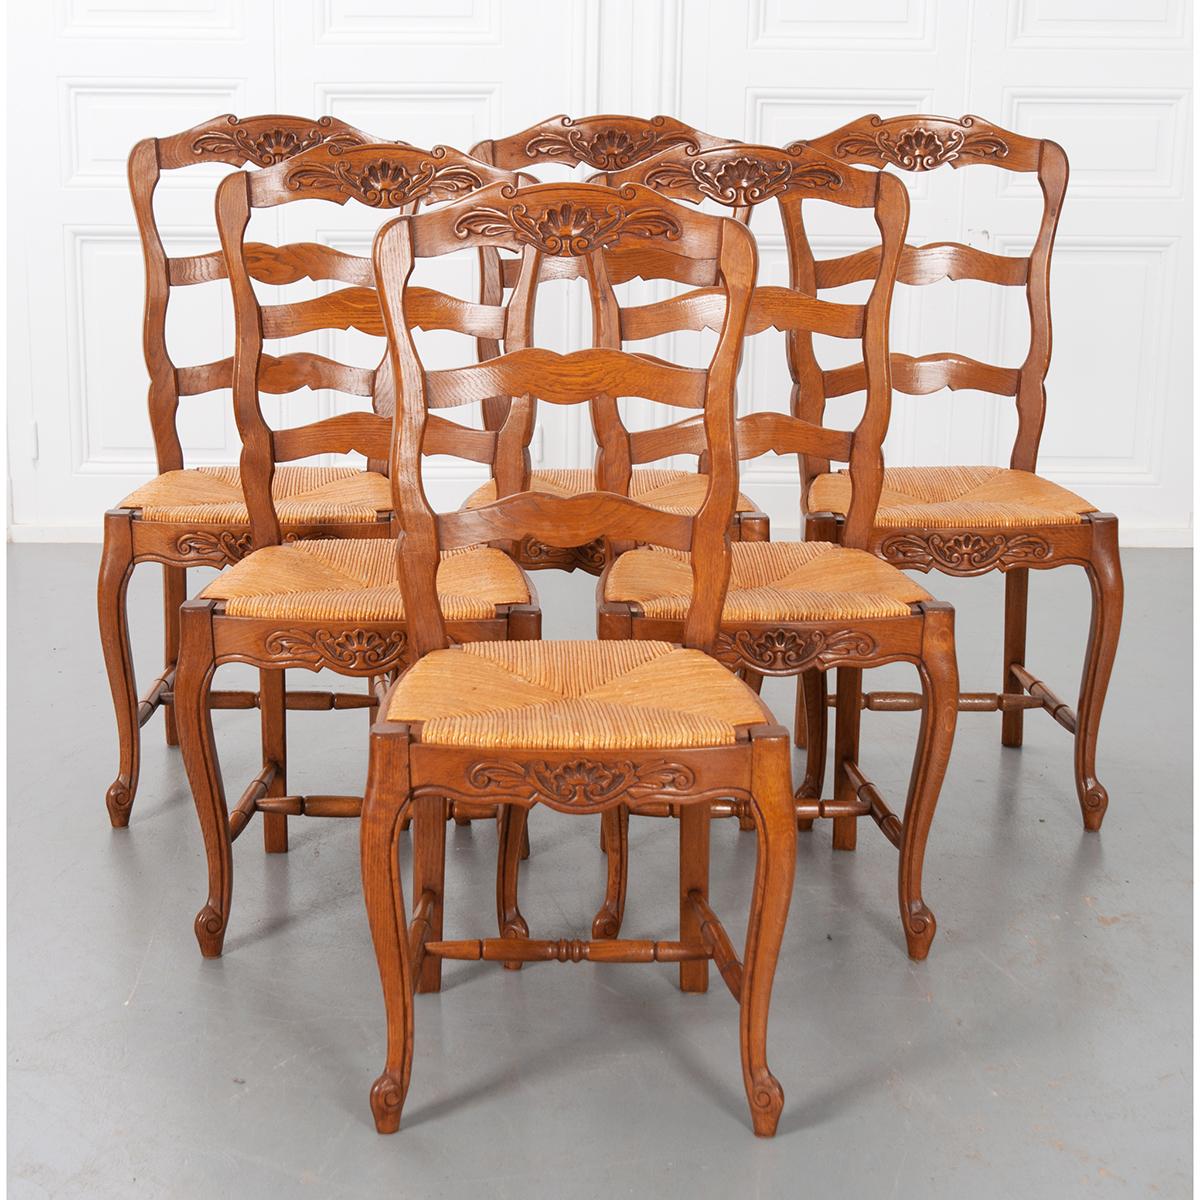 A set of six Provincial-style oak ladder back dining chairs with rush seats. The top and shaped front rails are each carved with beautiful shell cartouches. The chairs feature cabriole front legs that have scrolled escargot feet. The legs are braced